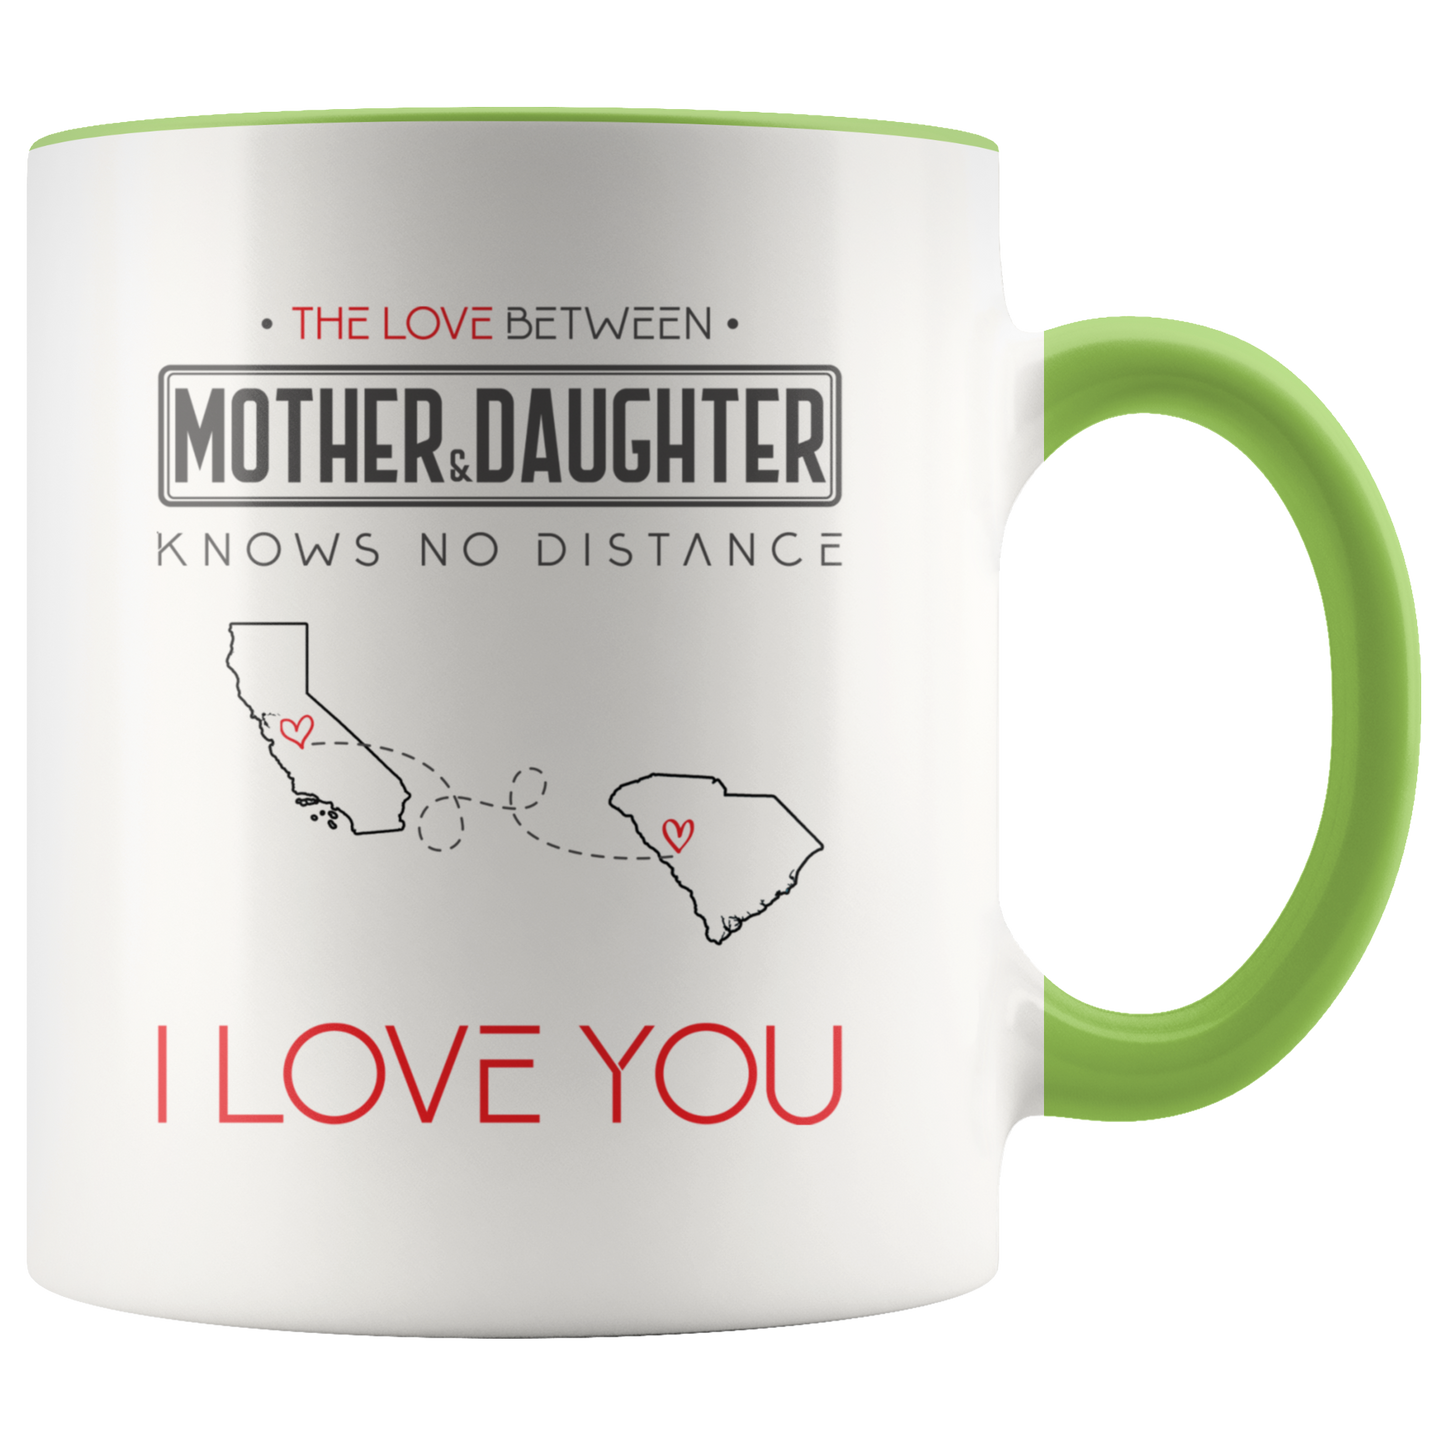 ND-21313785-sp-24079 - [ California | South Carolina ]Mom And Daughter Accent Mug 11 oz Red - The Love Between Mot